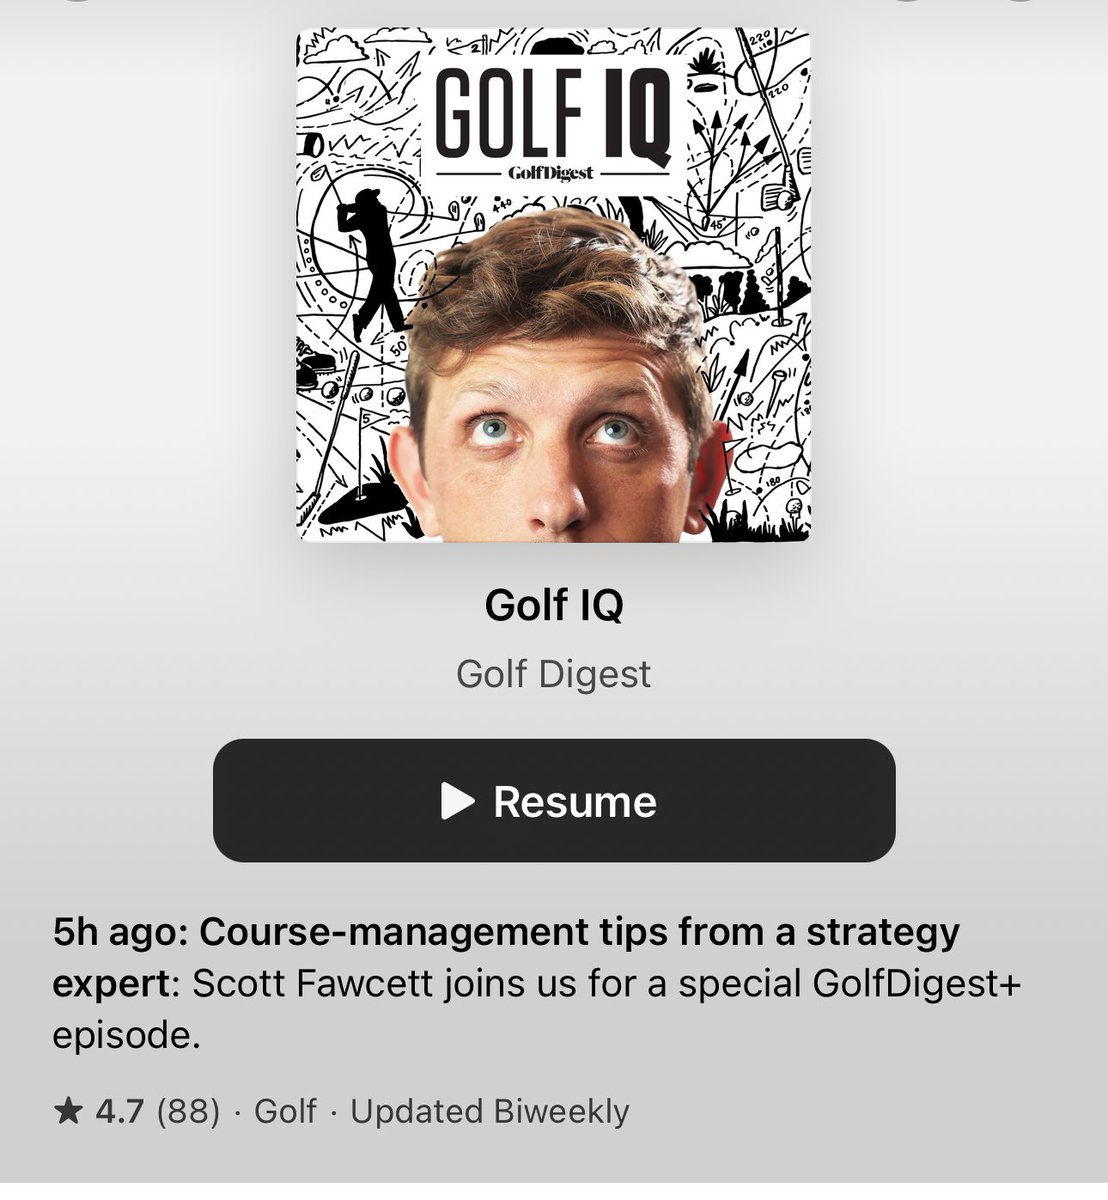 Scott Fawcett took course management and strategy to a new level with his ideas. Total game changer. 

HIGHLY recommend this podcast - and if you haven’t watched it, the full Happy Hour available to @GolfDigest + members. 

@LukeKerrDineen is crushing it these days! Link👇🏼